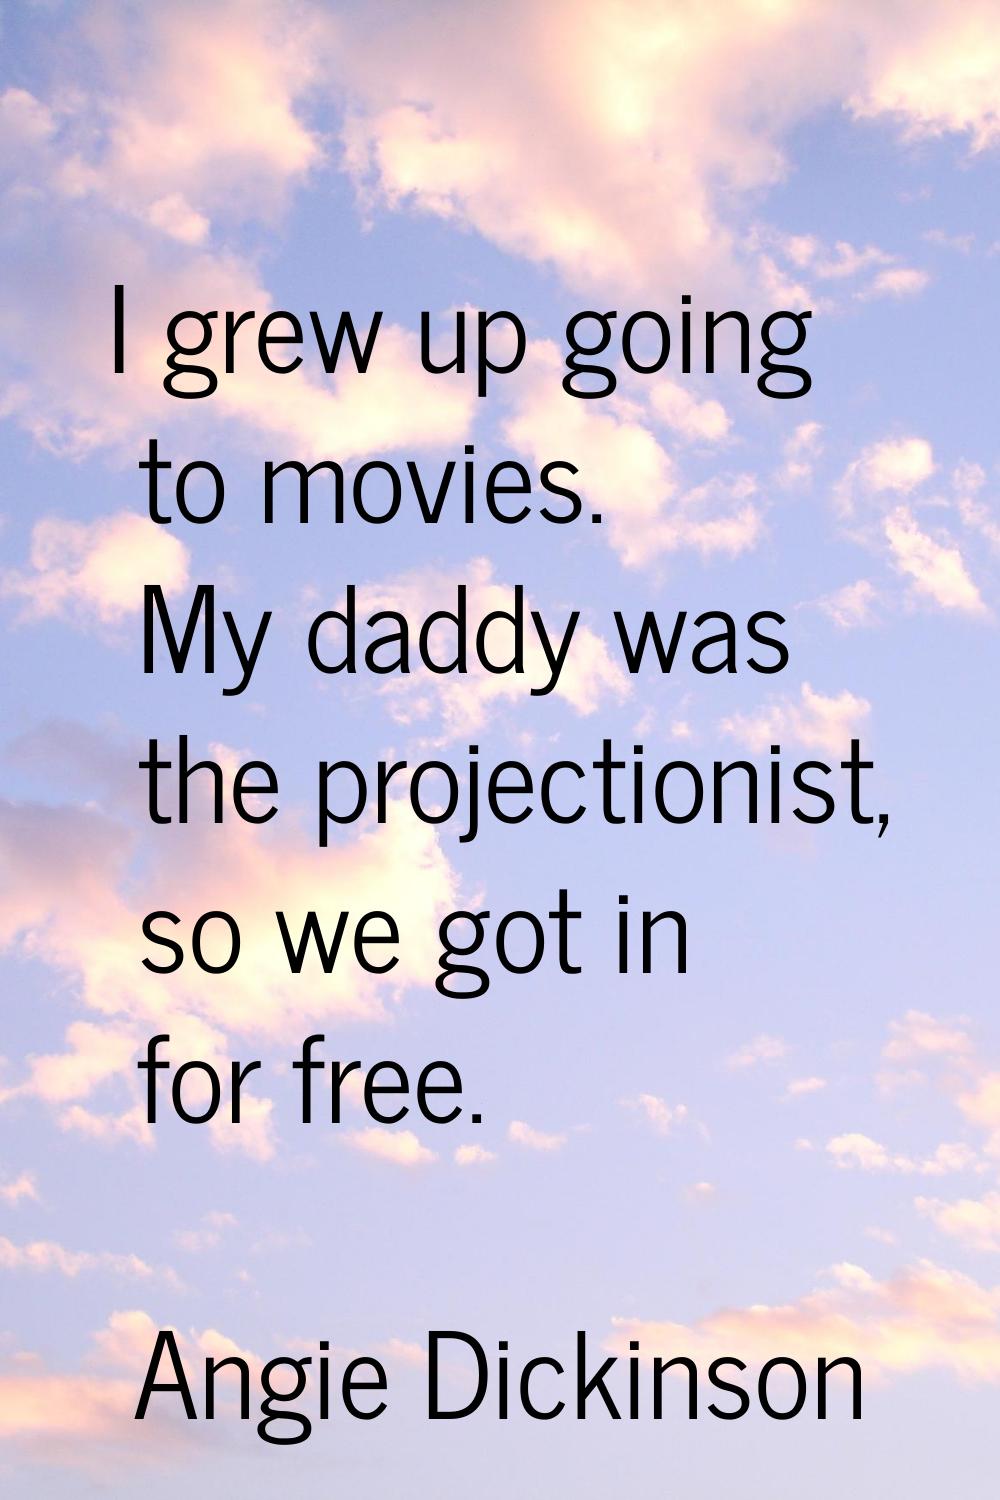 I grew up going to movies. My daddy was the projectionist, so we got in for free.